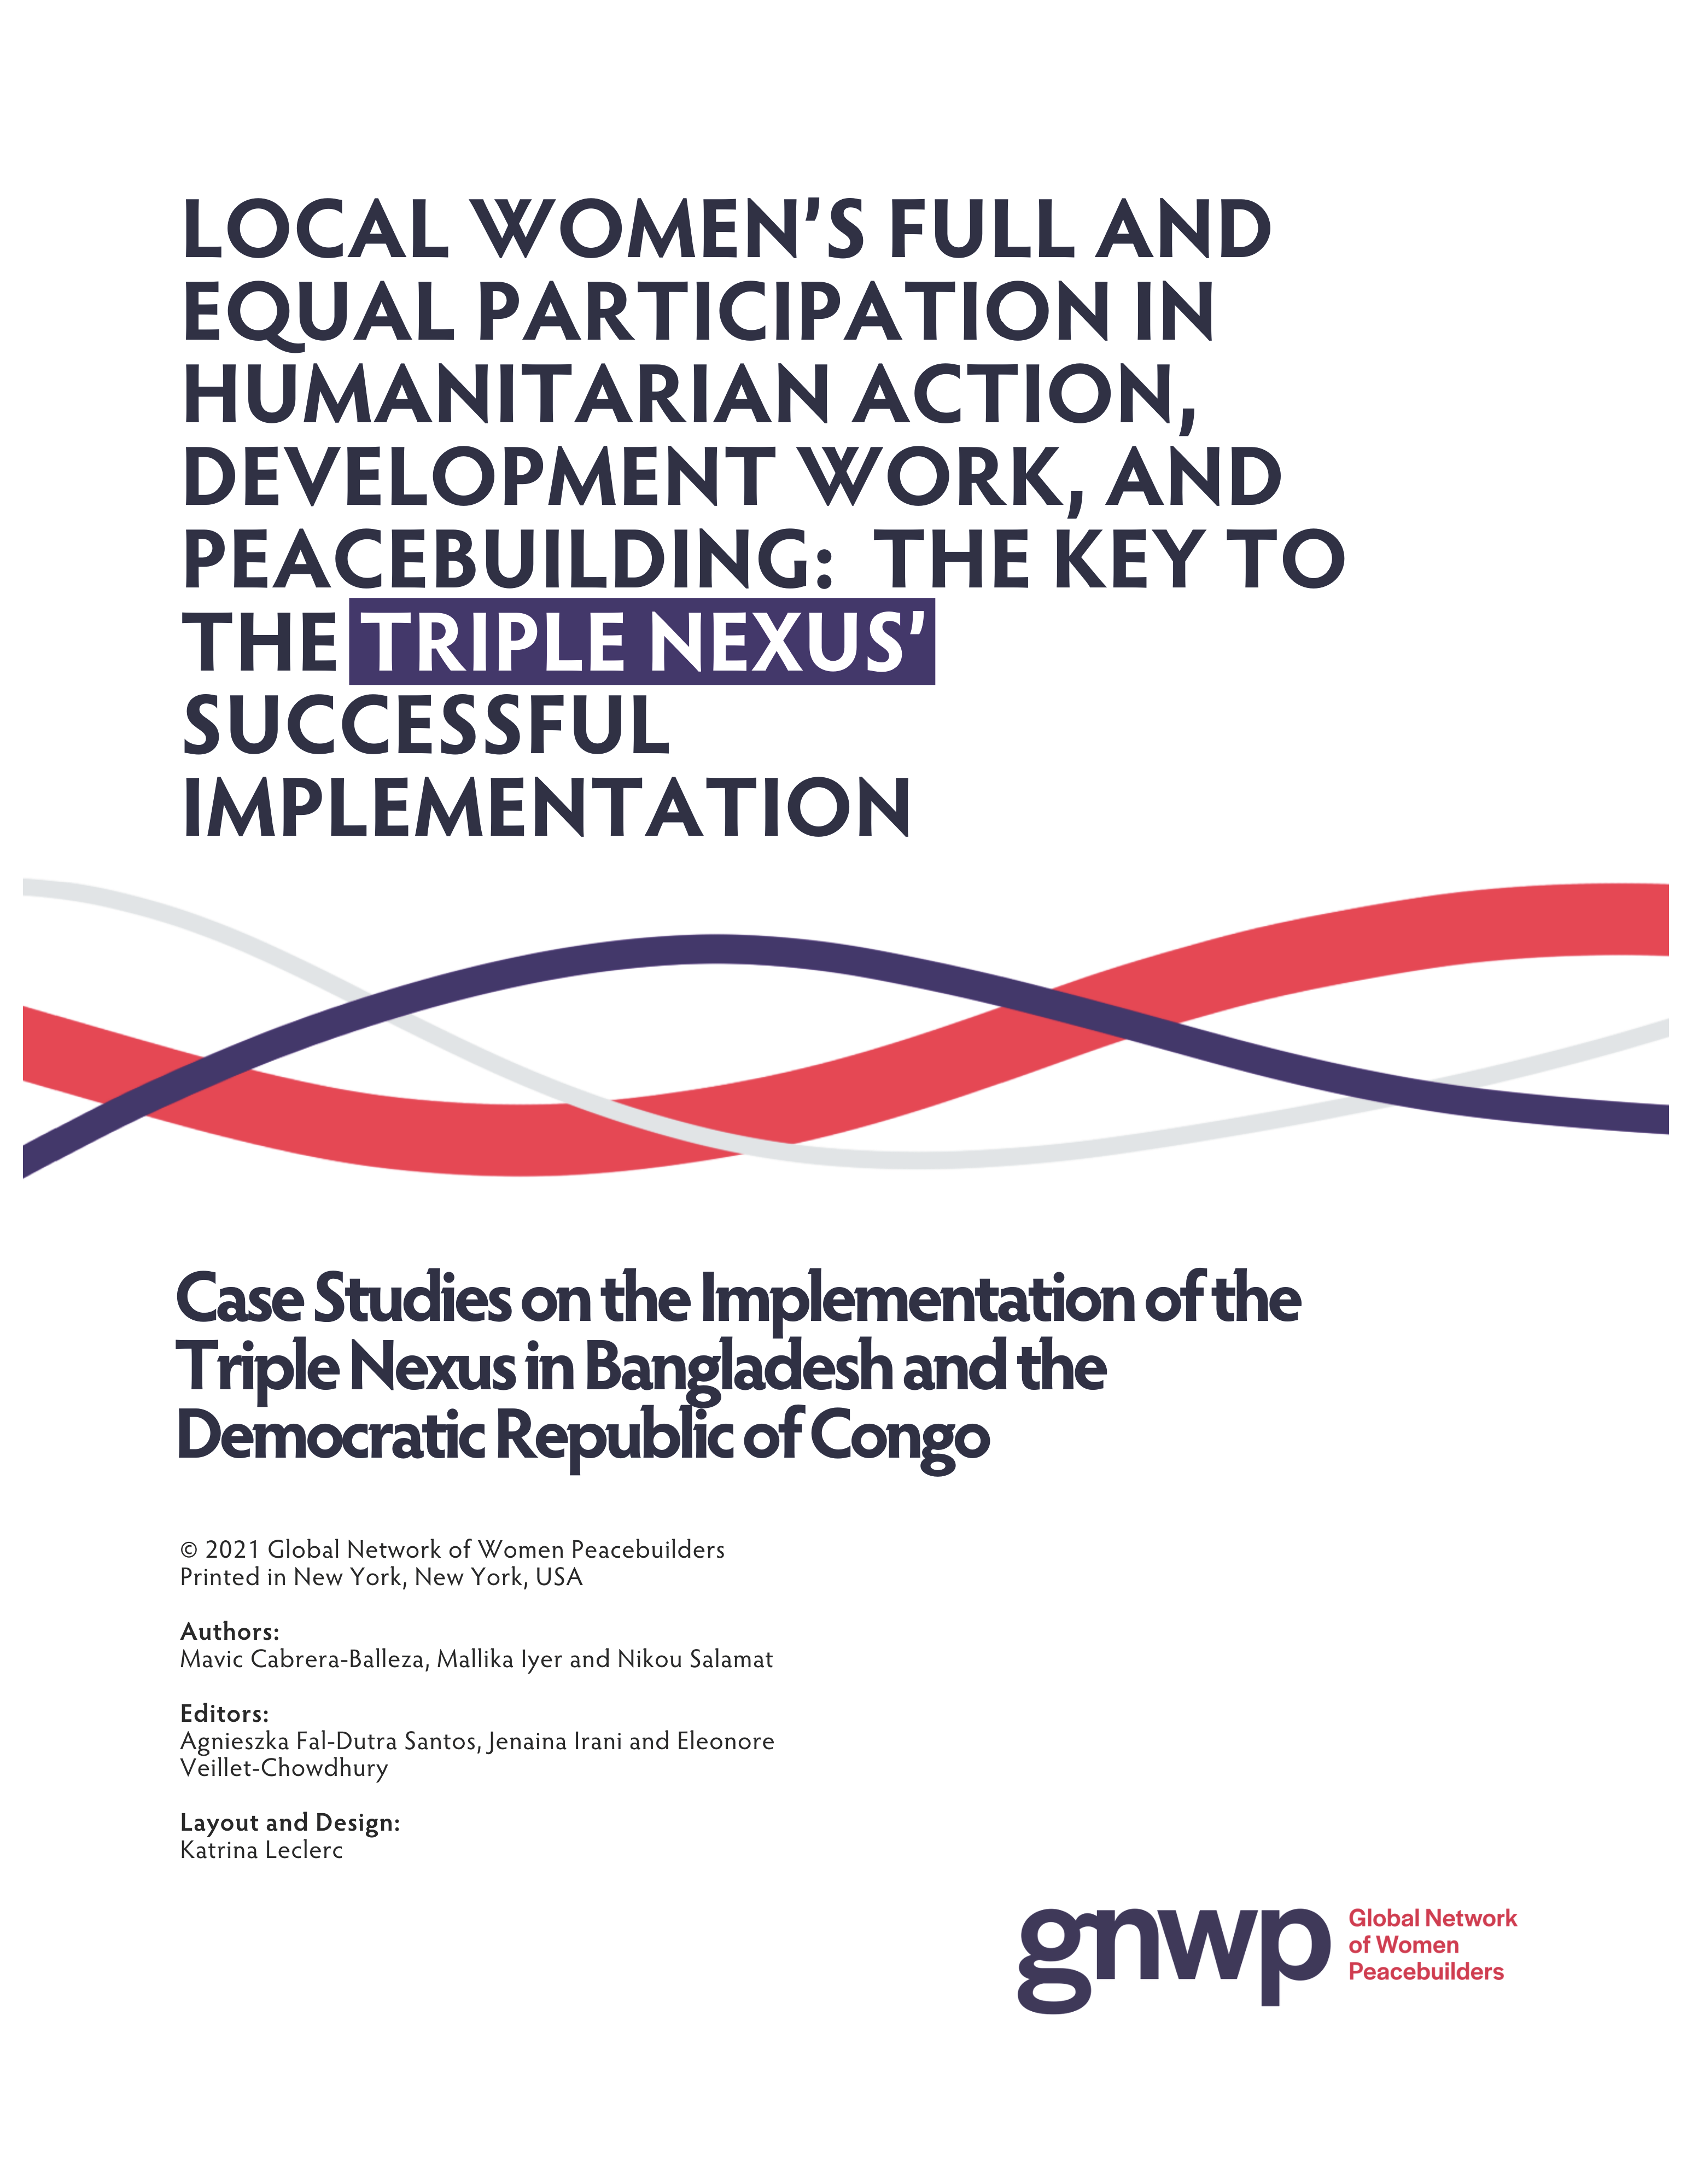 Cover page for Local Women’s Full and Equal Participation in Humanitarian Action, Development Work, and Peacebuilding: The key to the Triple Nexus’ Successful Implementation